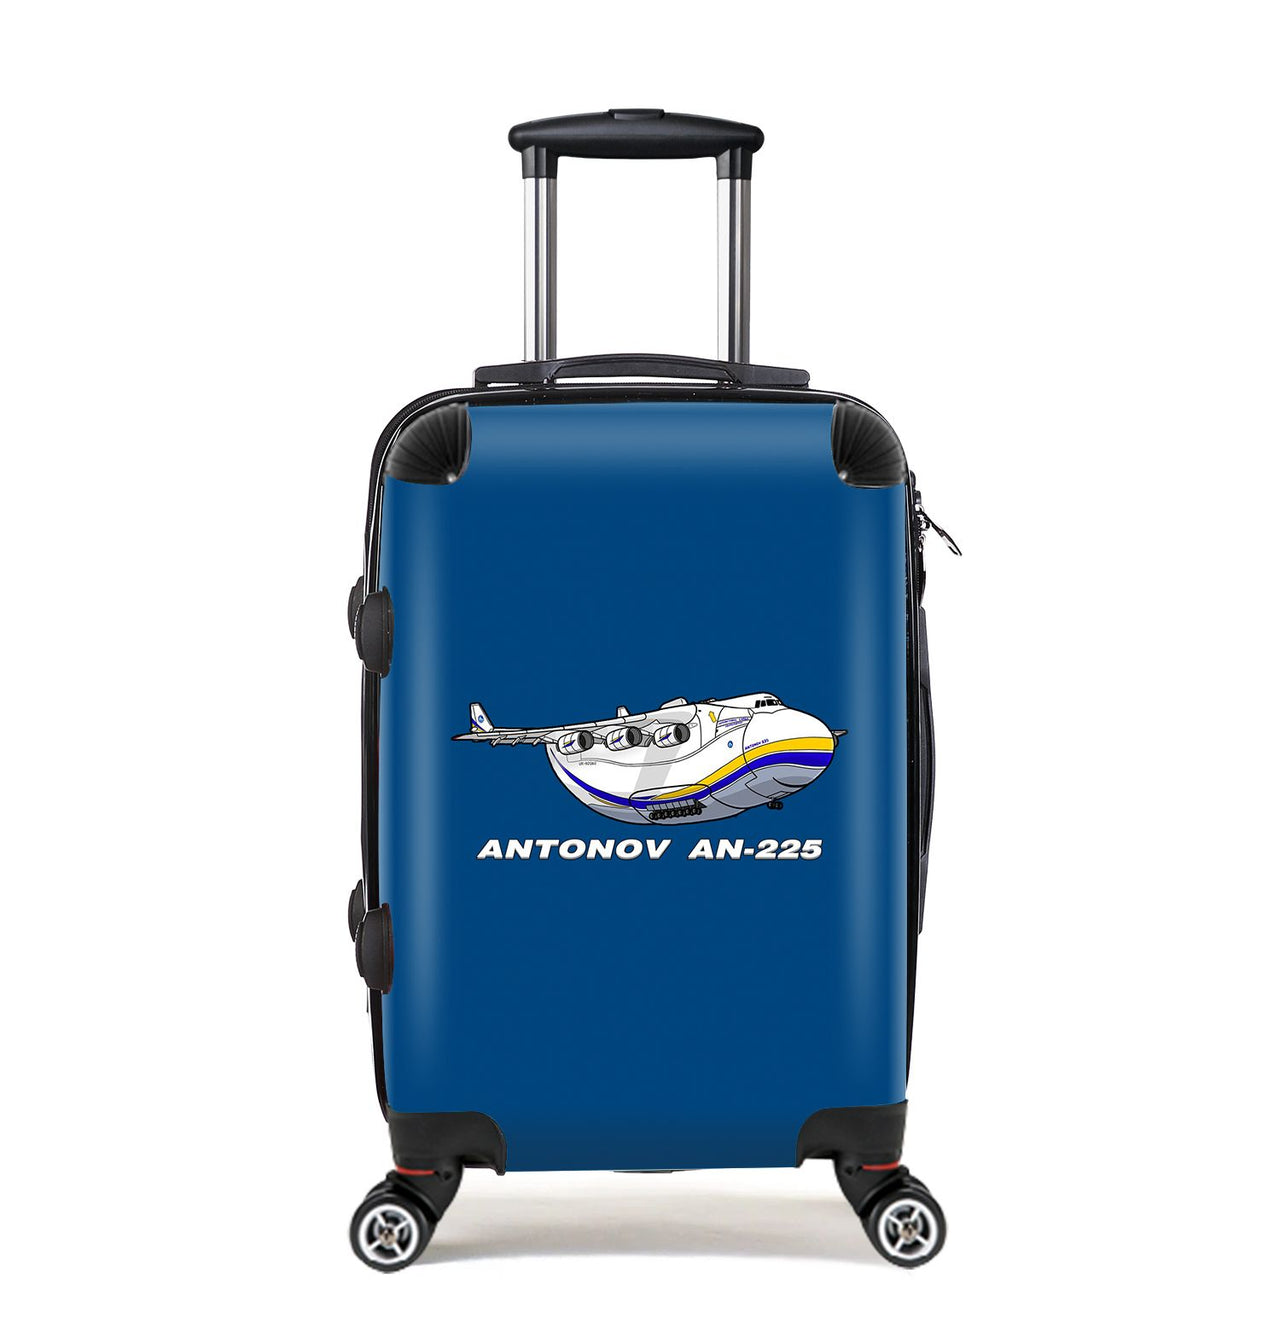 Antonov AN-225 (17) Designed Cabin Size Luggages